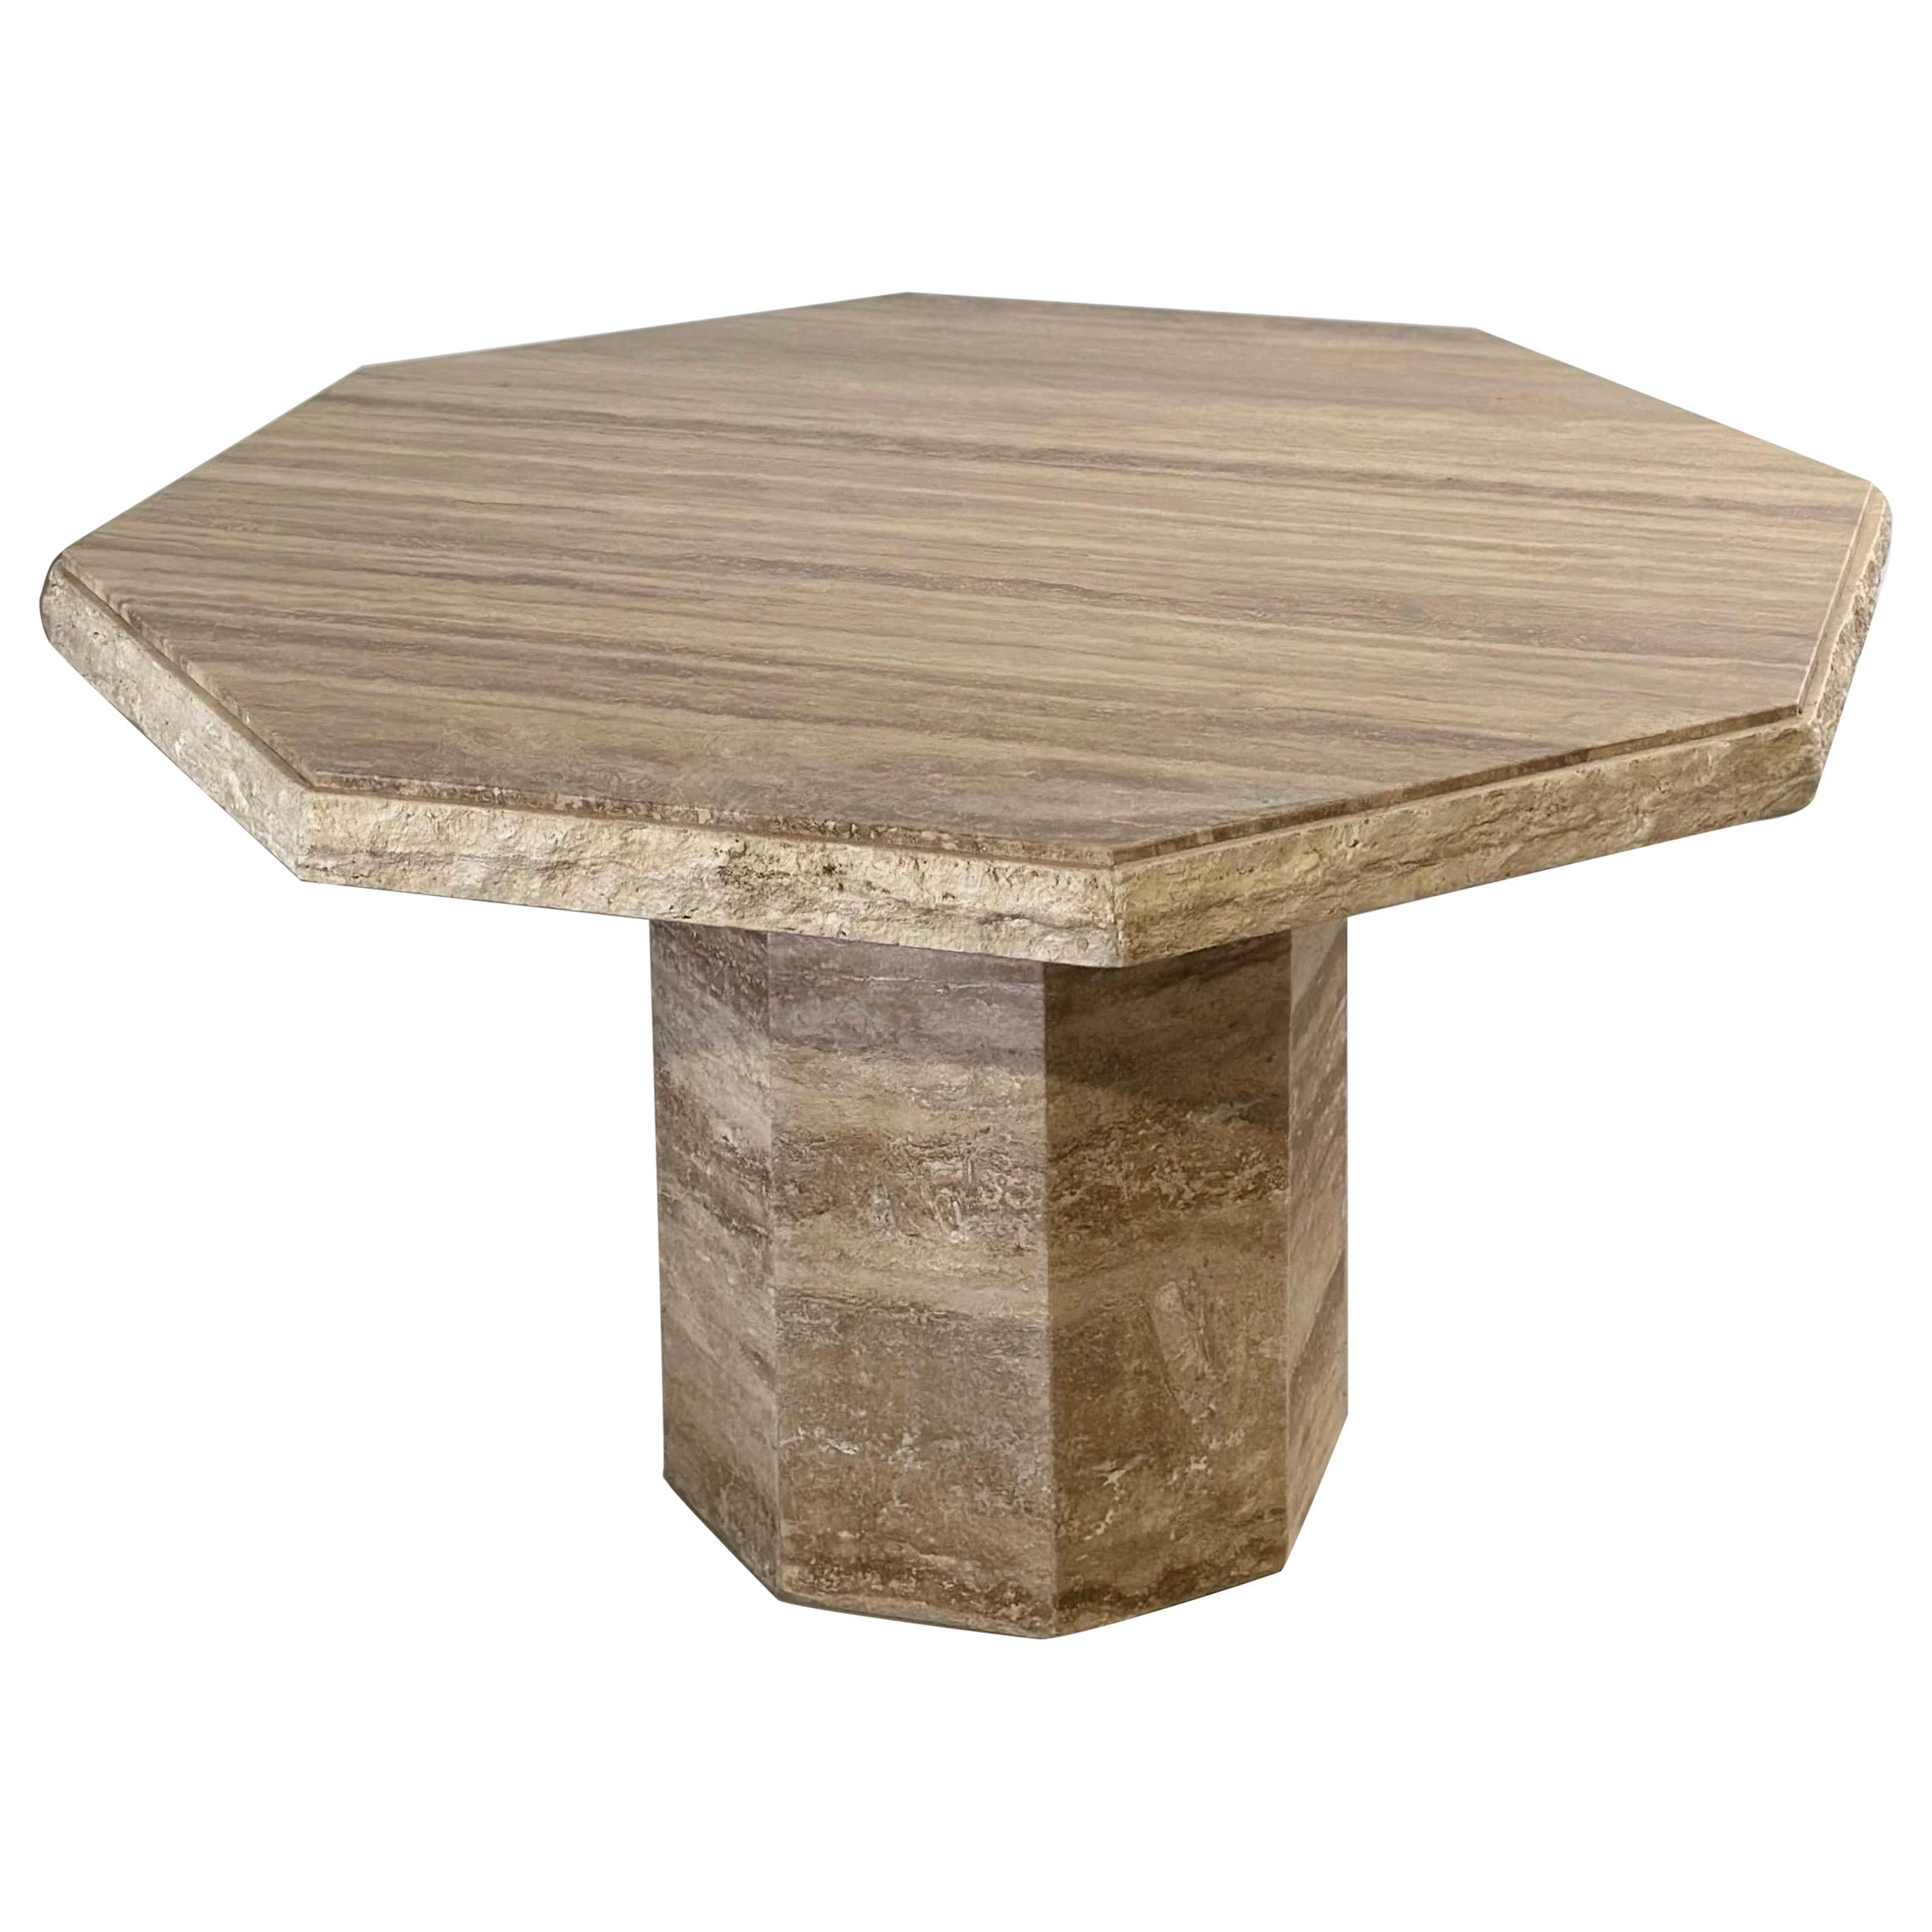 1970s Italian Travertine Stone Octagonal Pedestal Dining or Center Table  For Sale